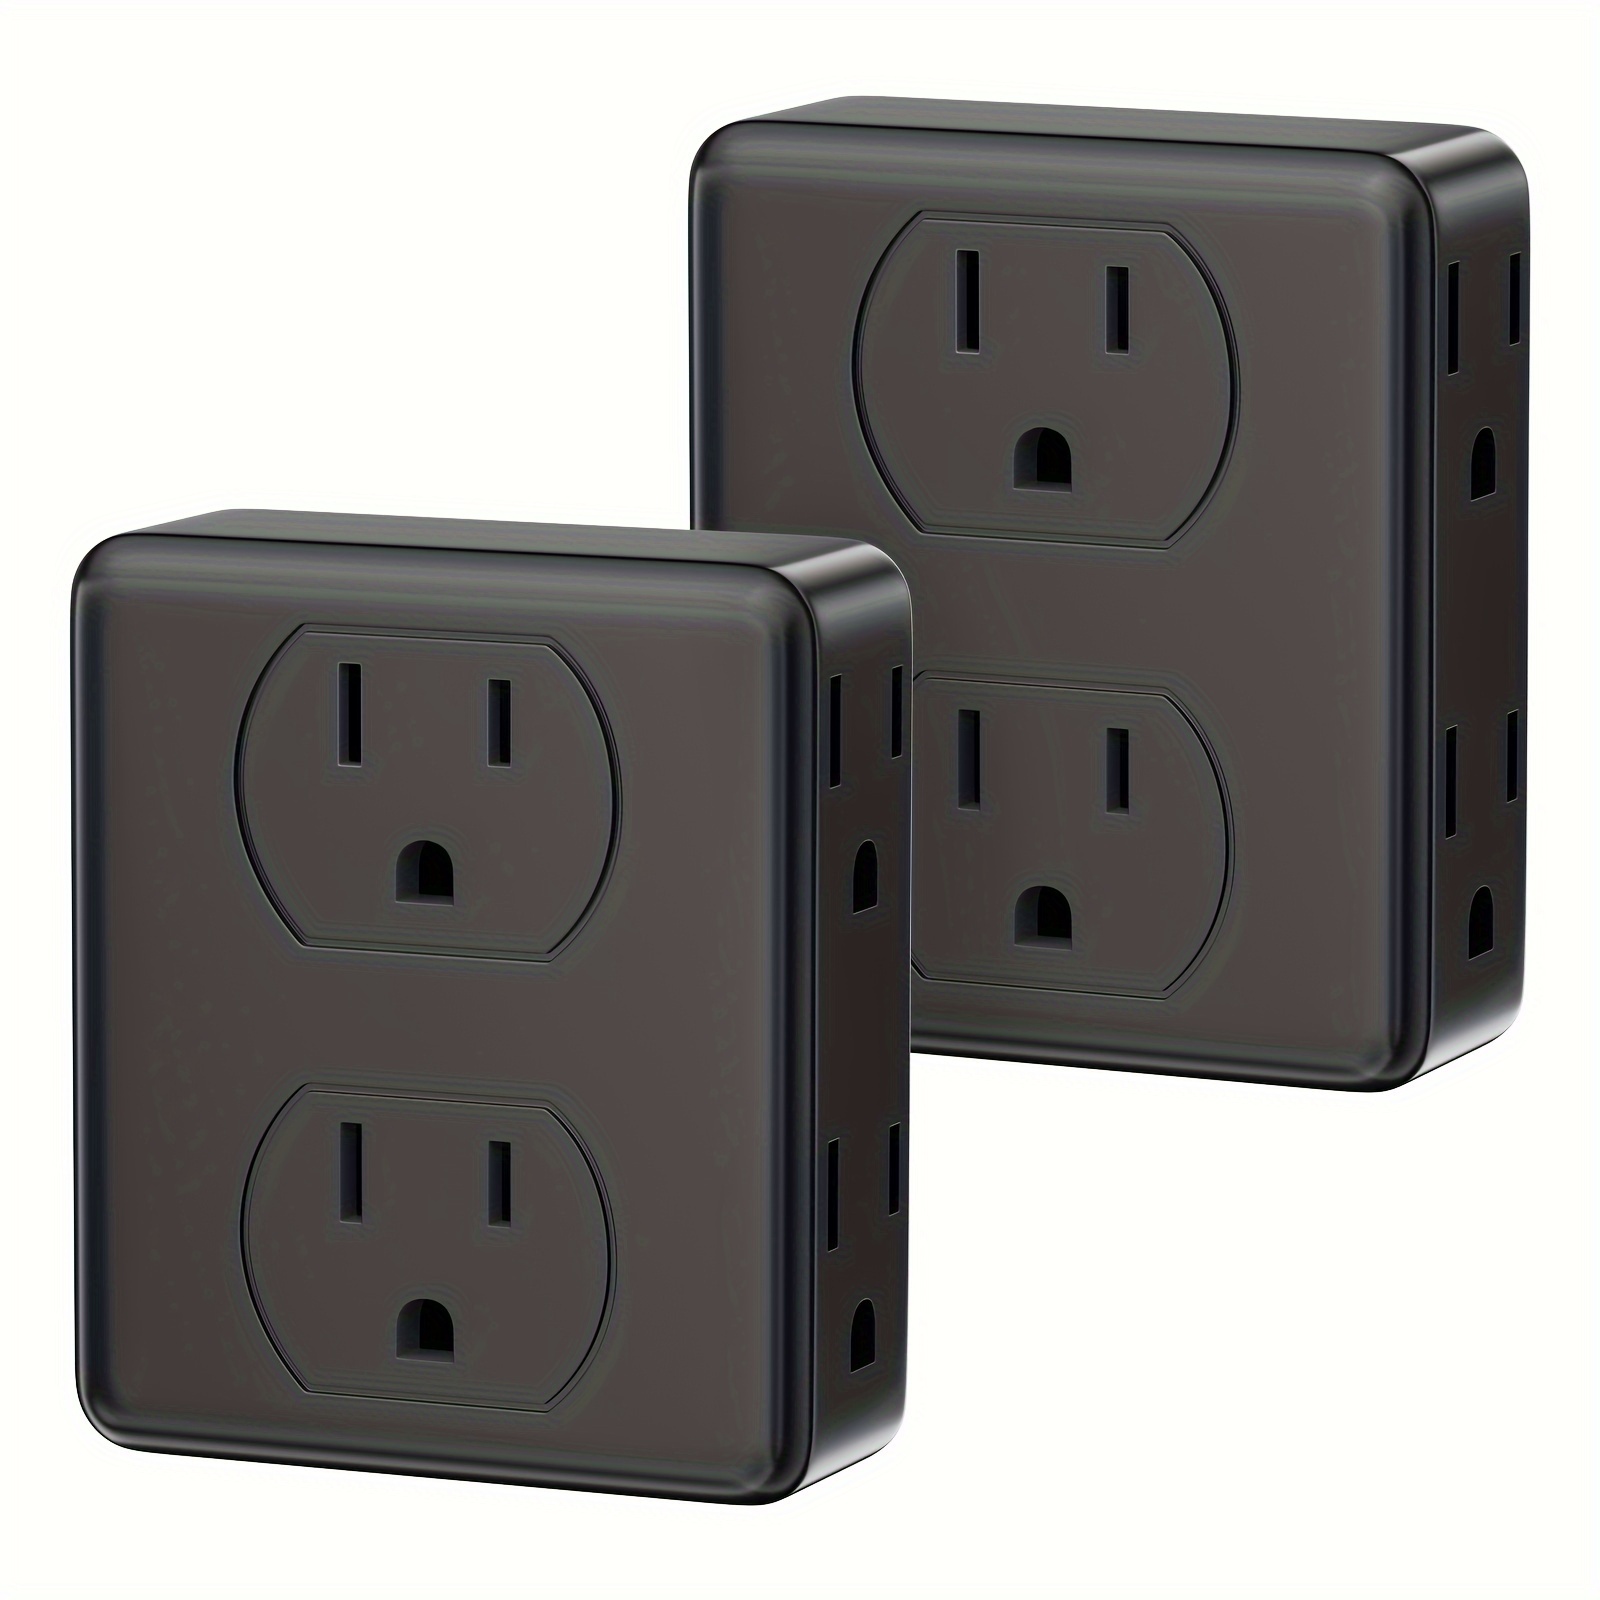 Wall Outlet with 3 USB Charger Multi Outlet for Home Bathroom Dorm